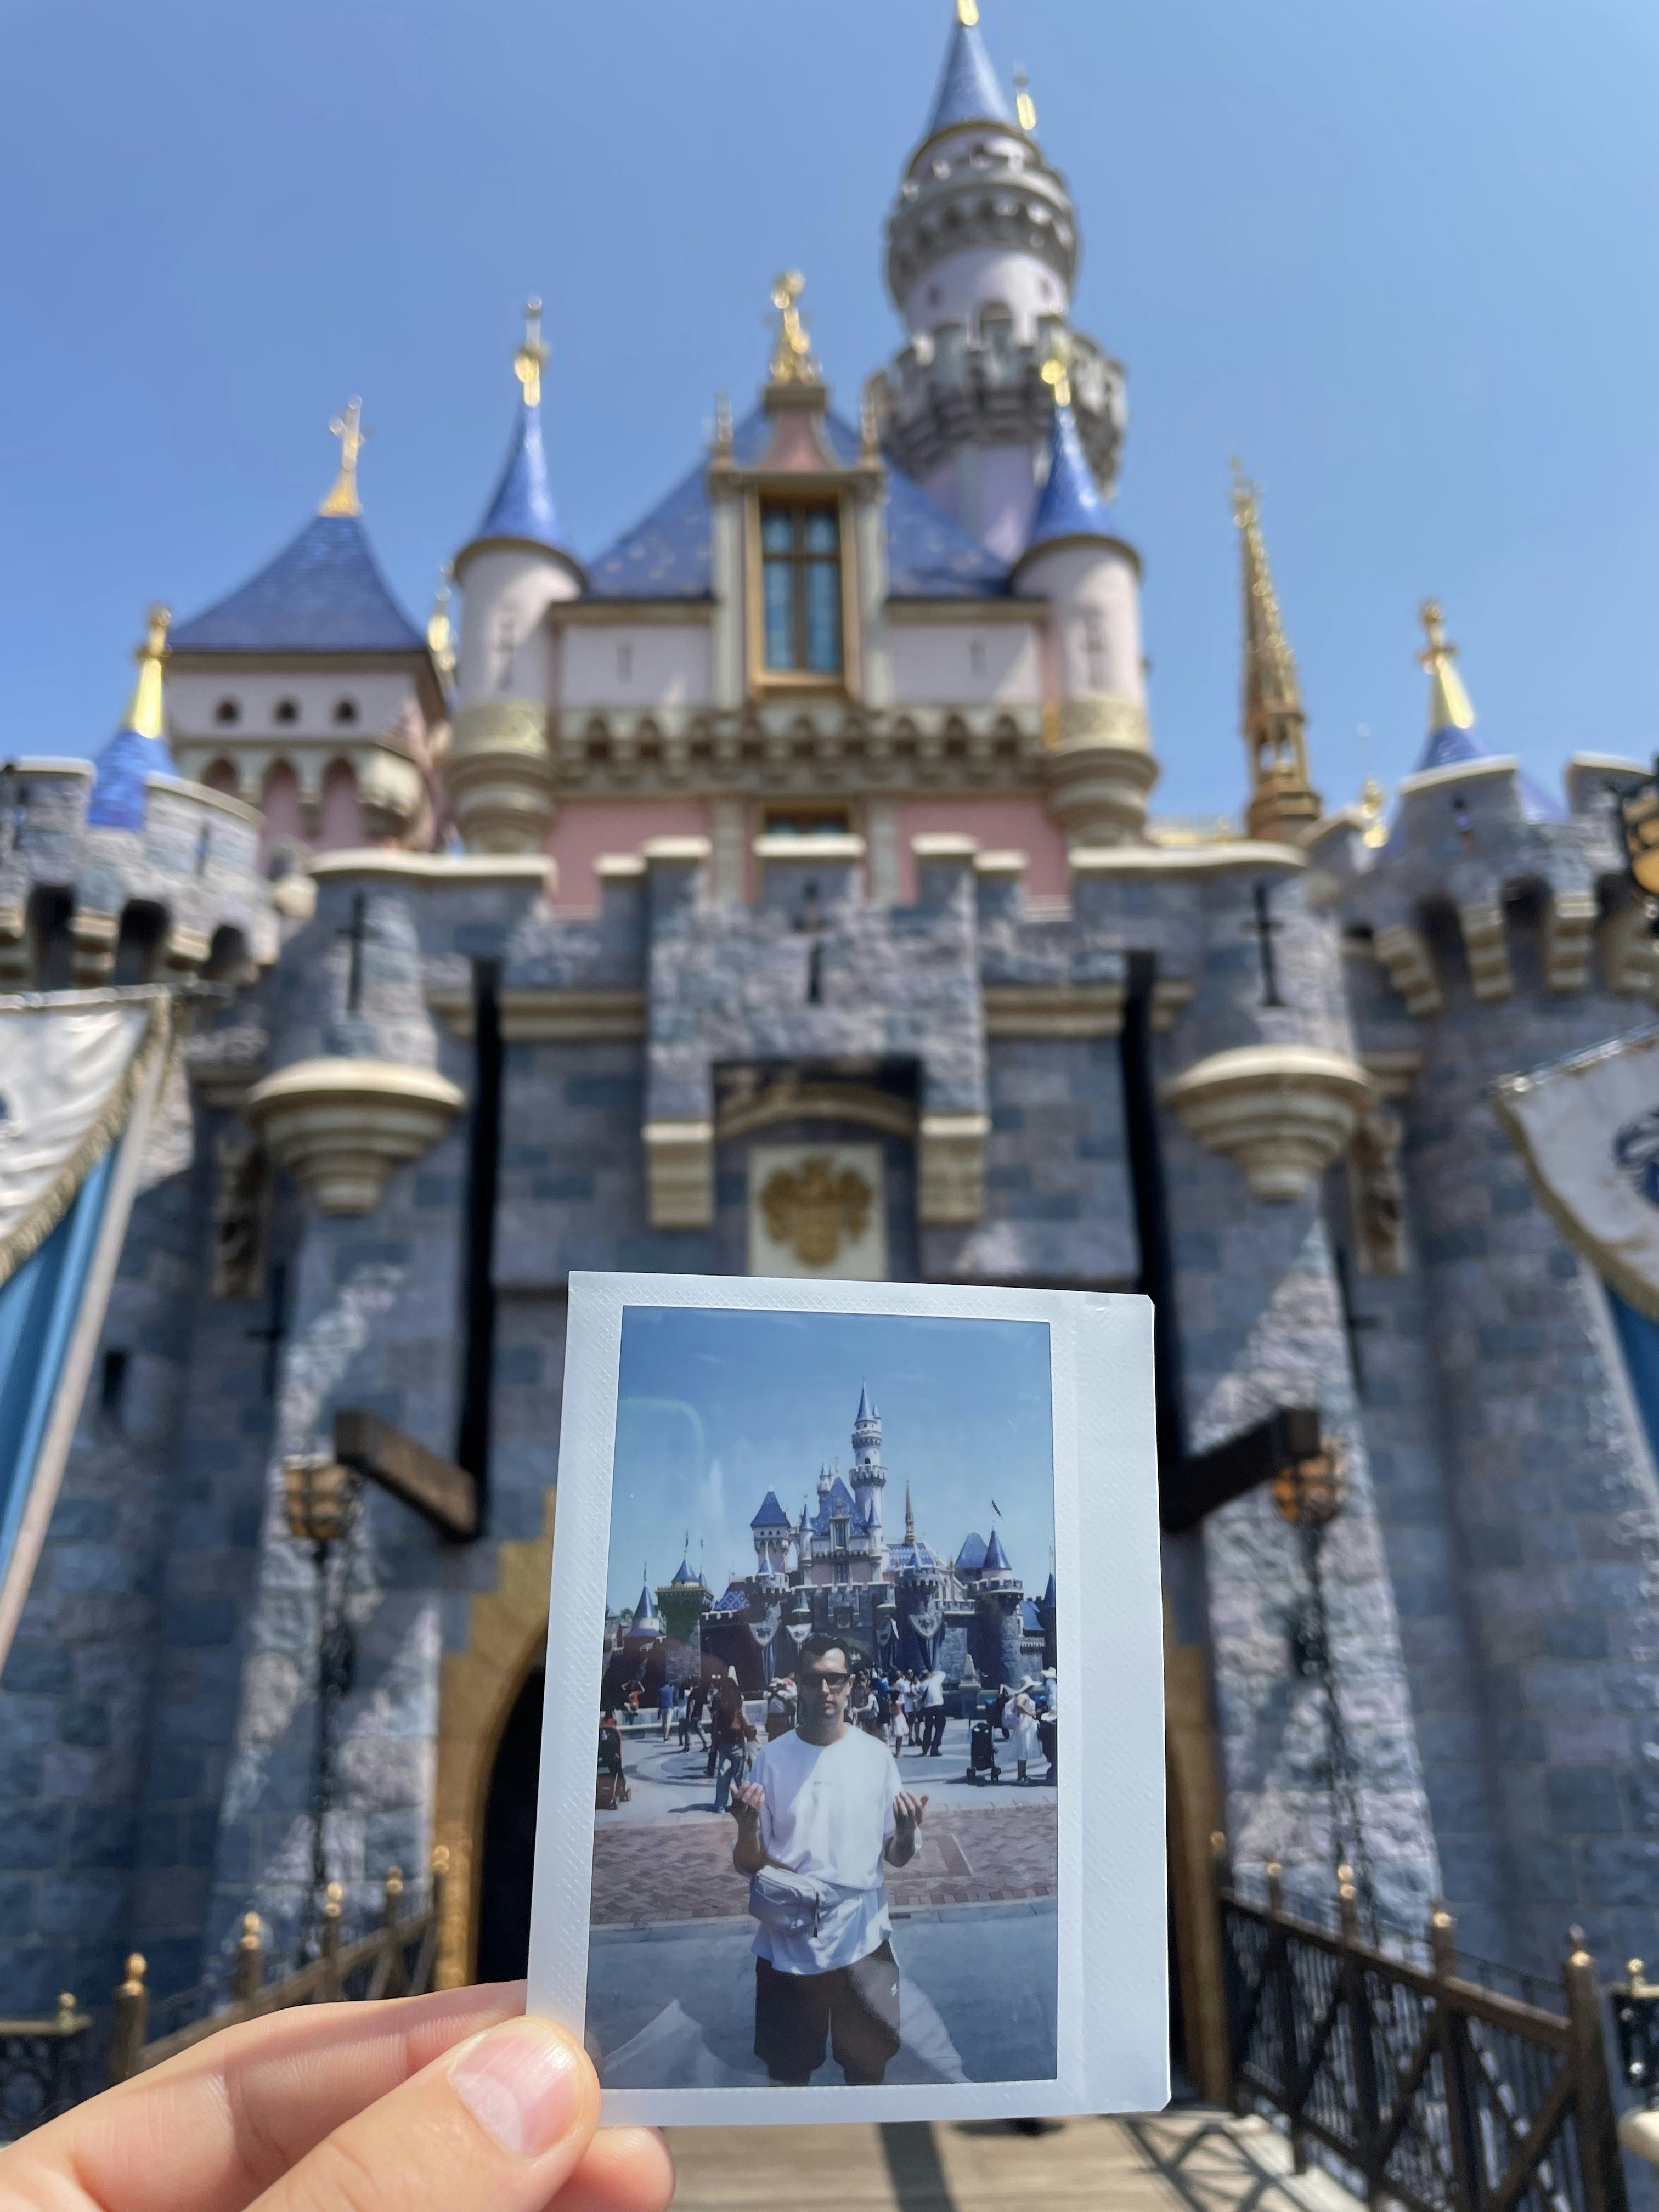 Photo of a polaroid photo in front of the Disneyland castle, showing the artist Olgac Bozalp in front of the castle.